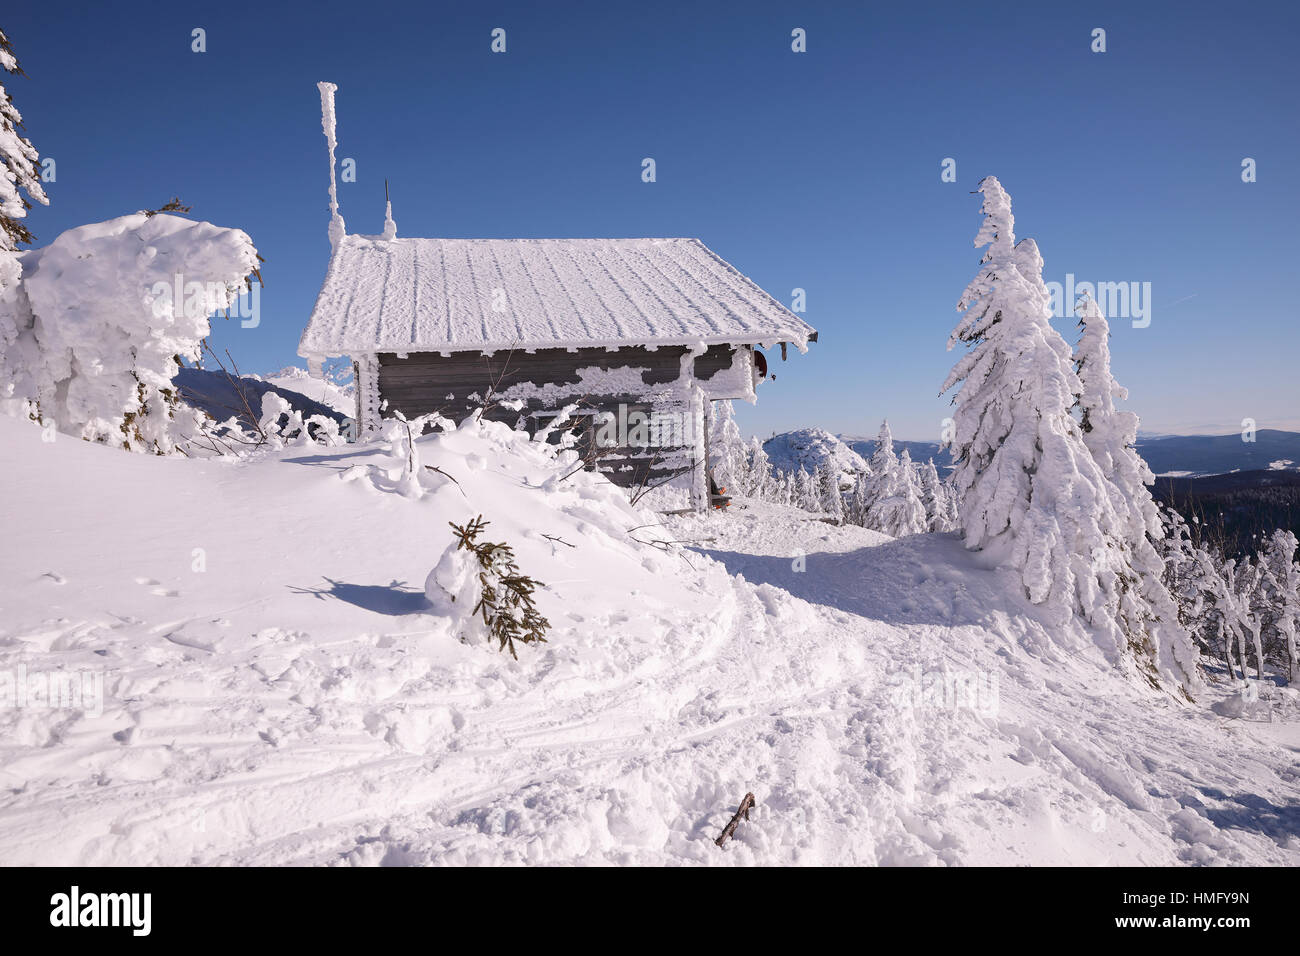 Mountain wooden huts covered with frozen snow. Grosser Arber, Bayerisch Eisenstein, Germany. Winter snowy summit of Mt. Grosser Arber at Bavarian Fore Stock Photo